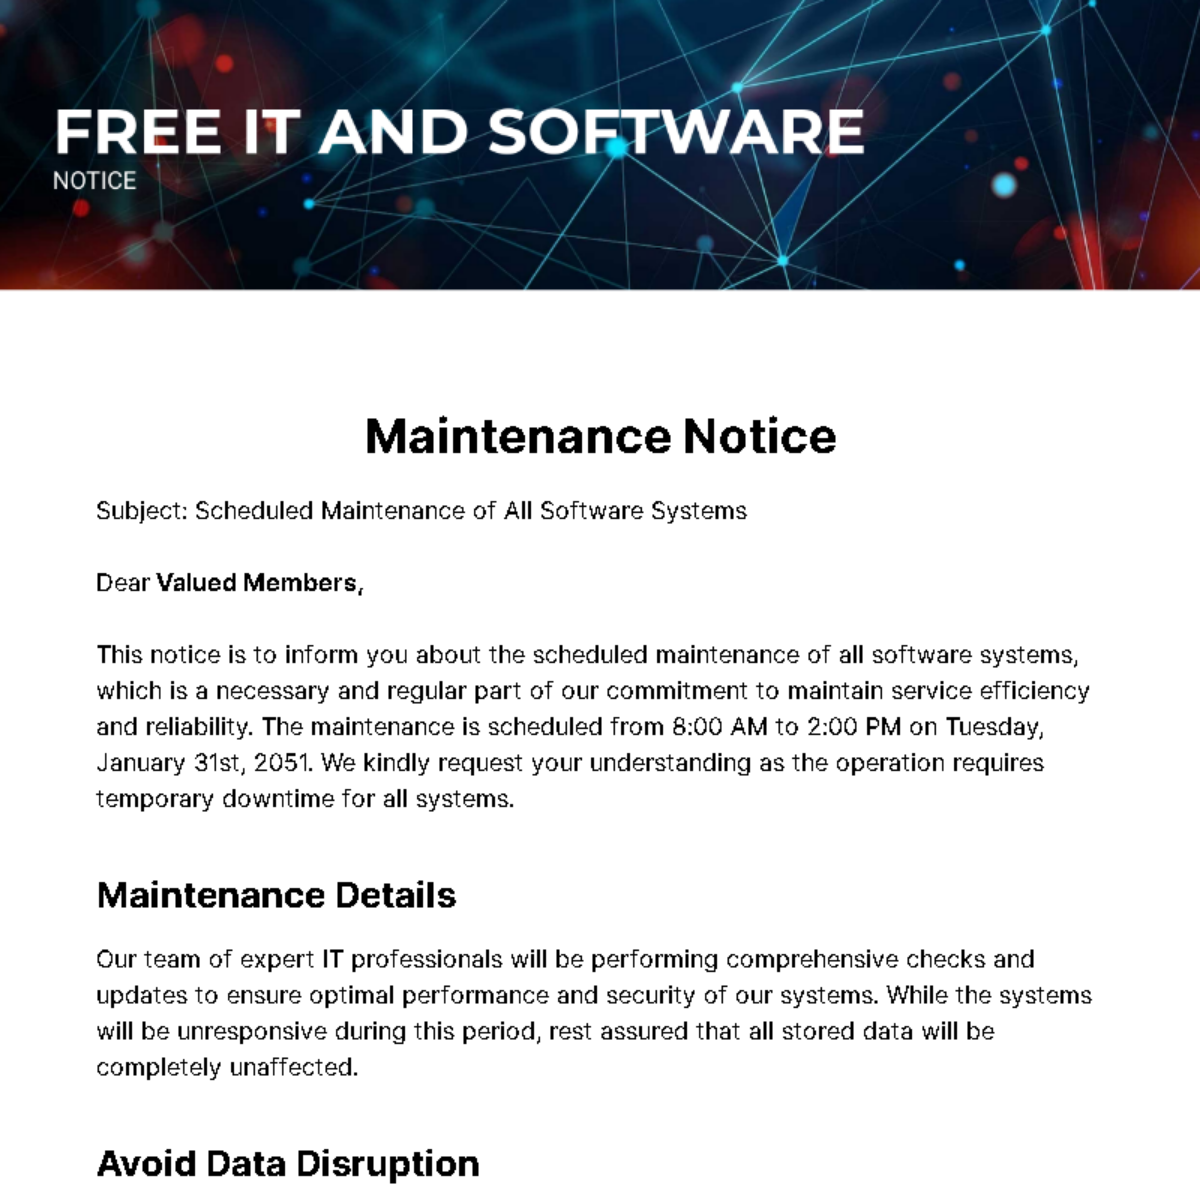 Free IT and Software Notice Template